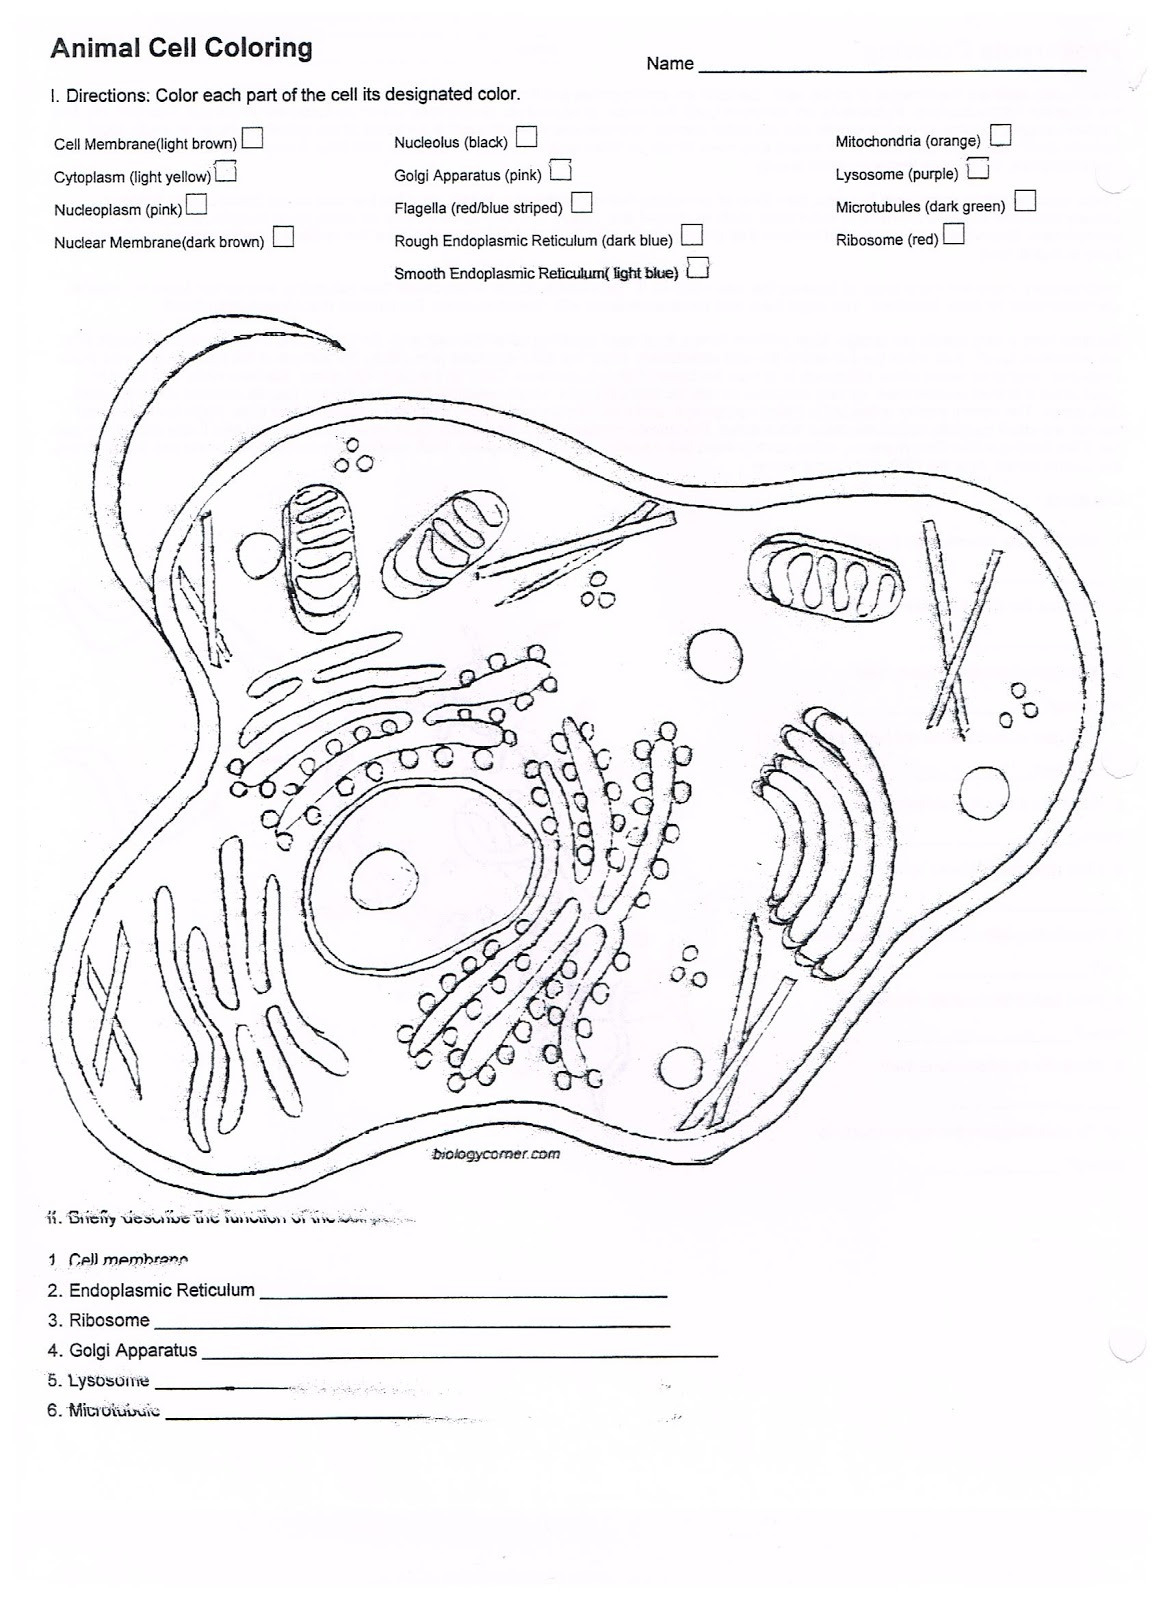 Coloring Animal Cell Worksheet Answer Key For Animal Cell Worksheet Answers